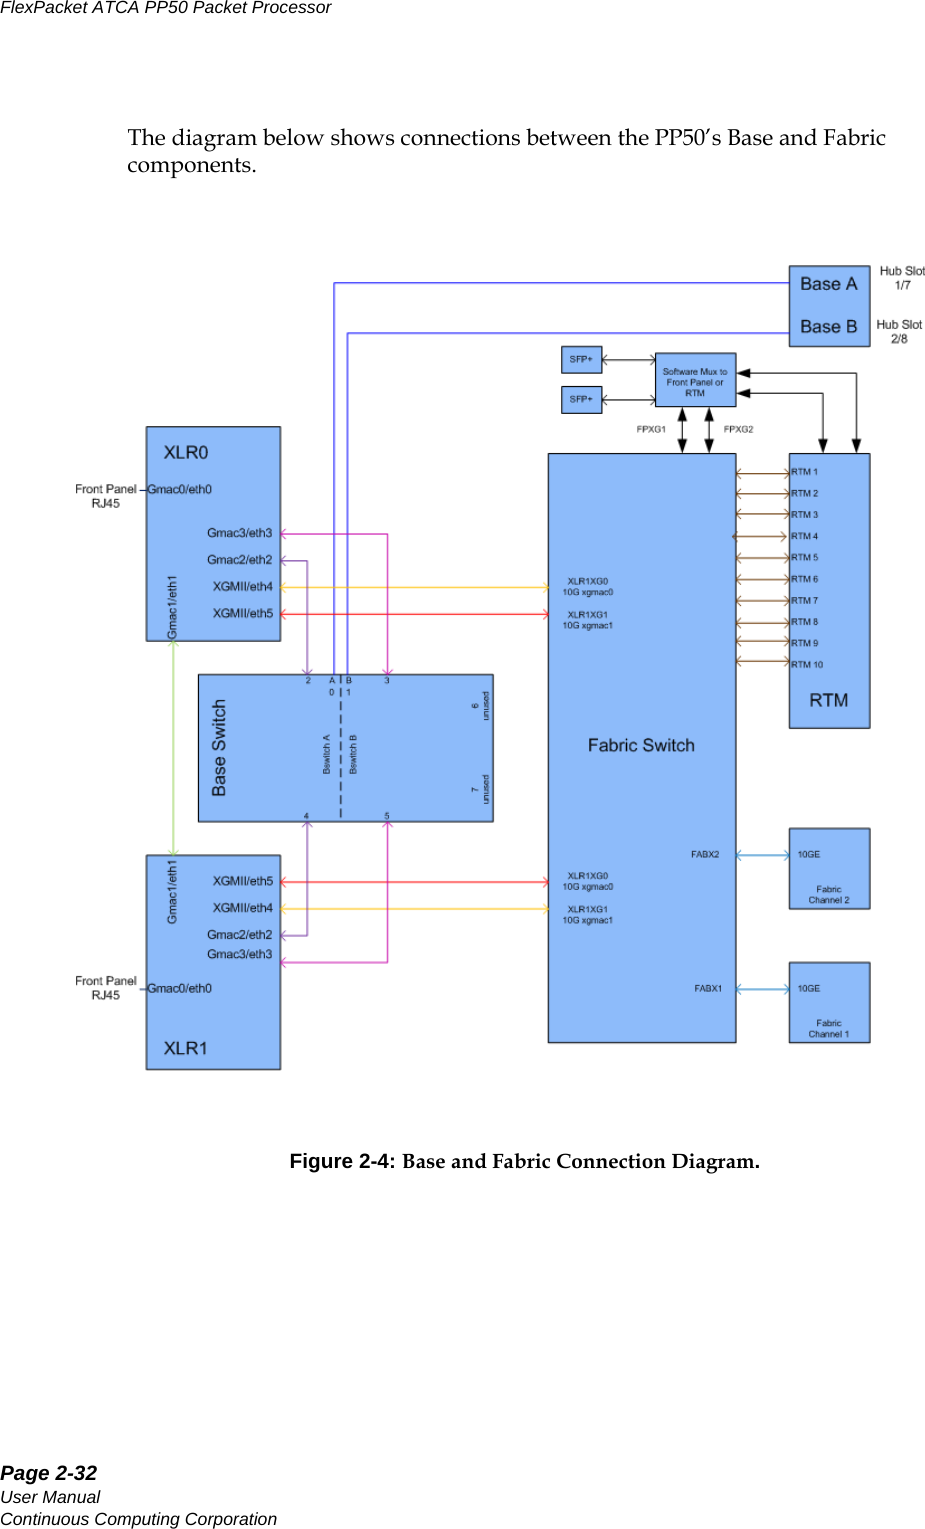 Page 2-32User ManualContinuous Computing CorporationFlexPacket ATCA PP50 Packet Processor     PreliminaryThe diagram below shows connections between the PP50’s Base and Fabric components.Figure 2-4: Base and Fabric Connection Diagram.